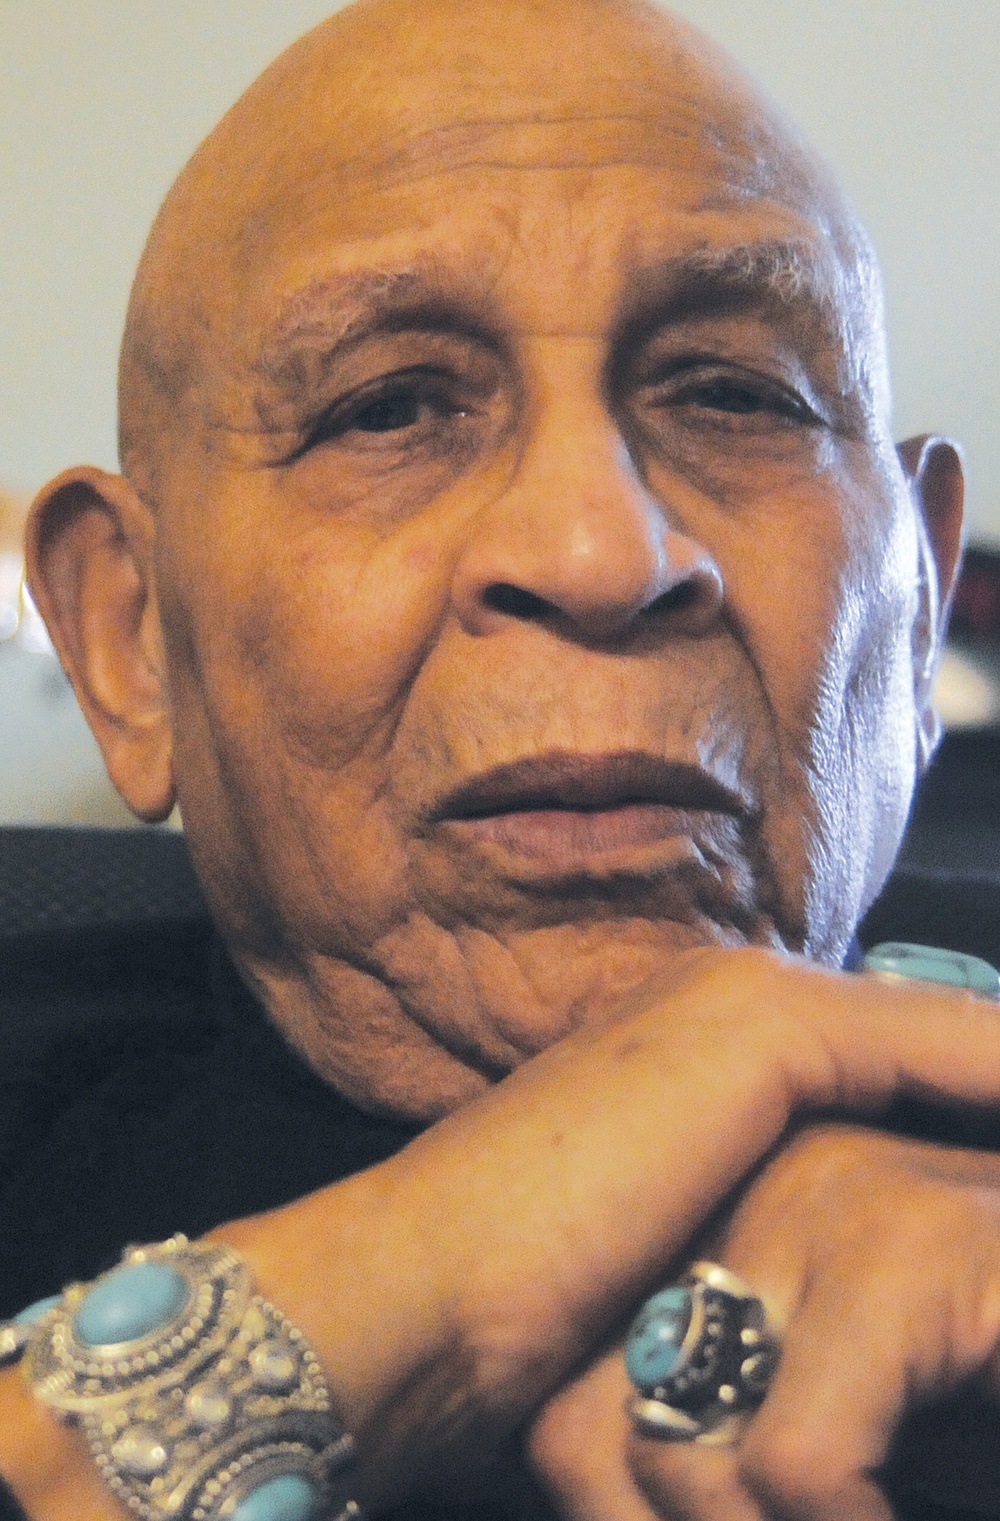 90-year-old Buffalo Soldier a voice for his famous brethren